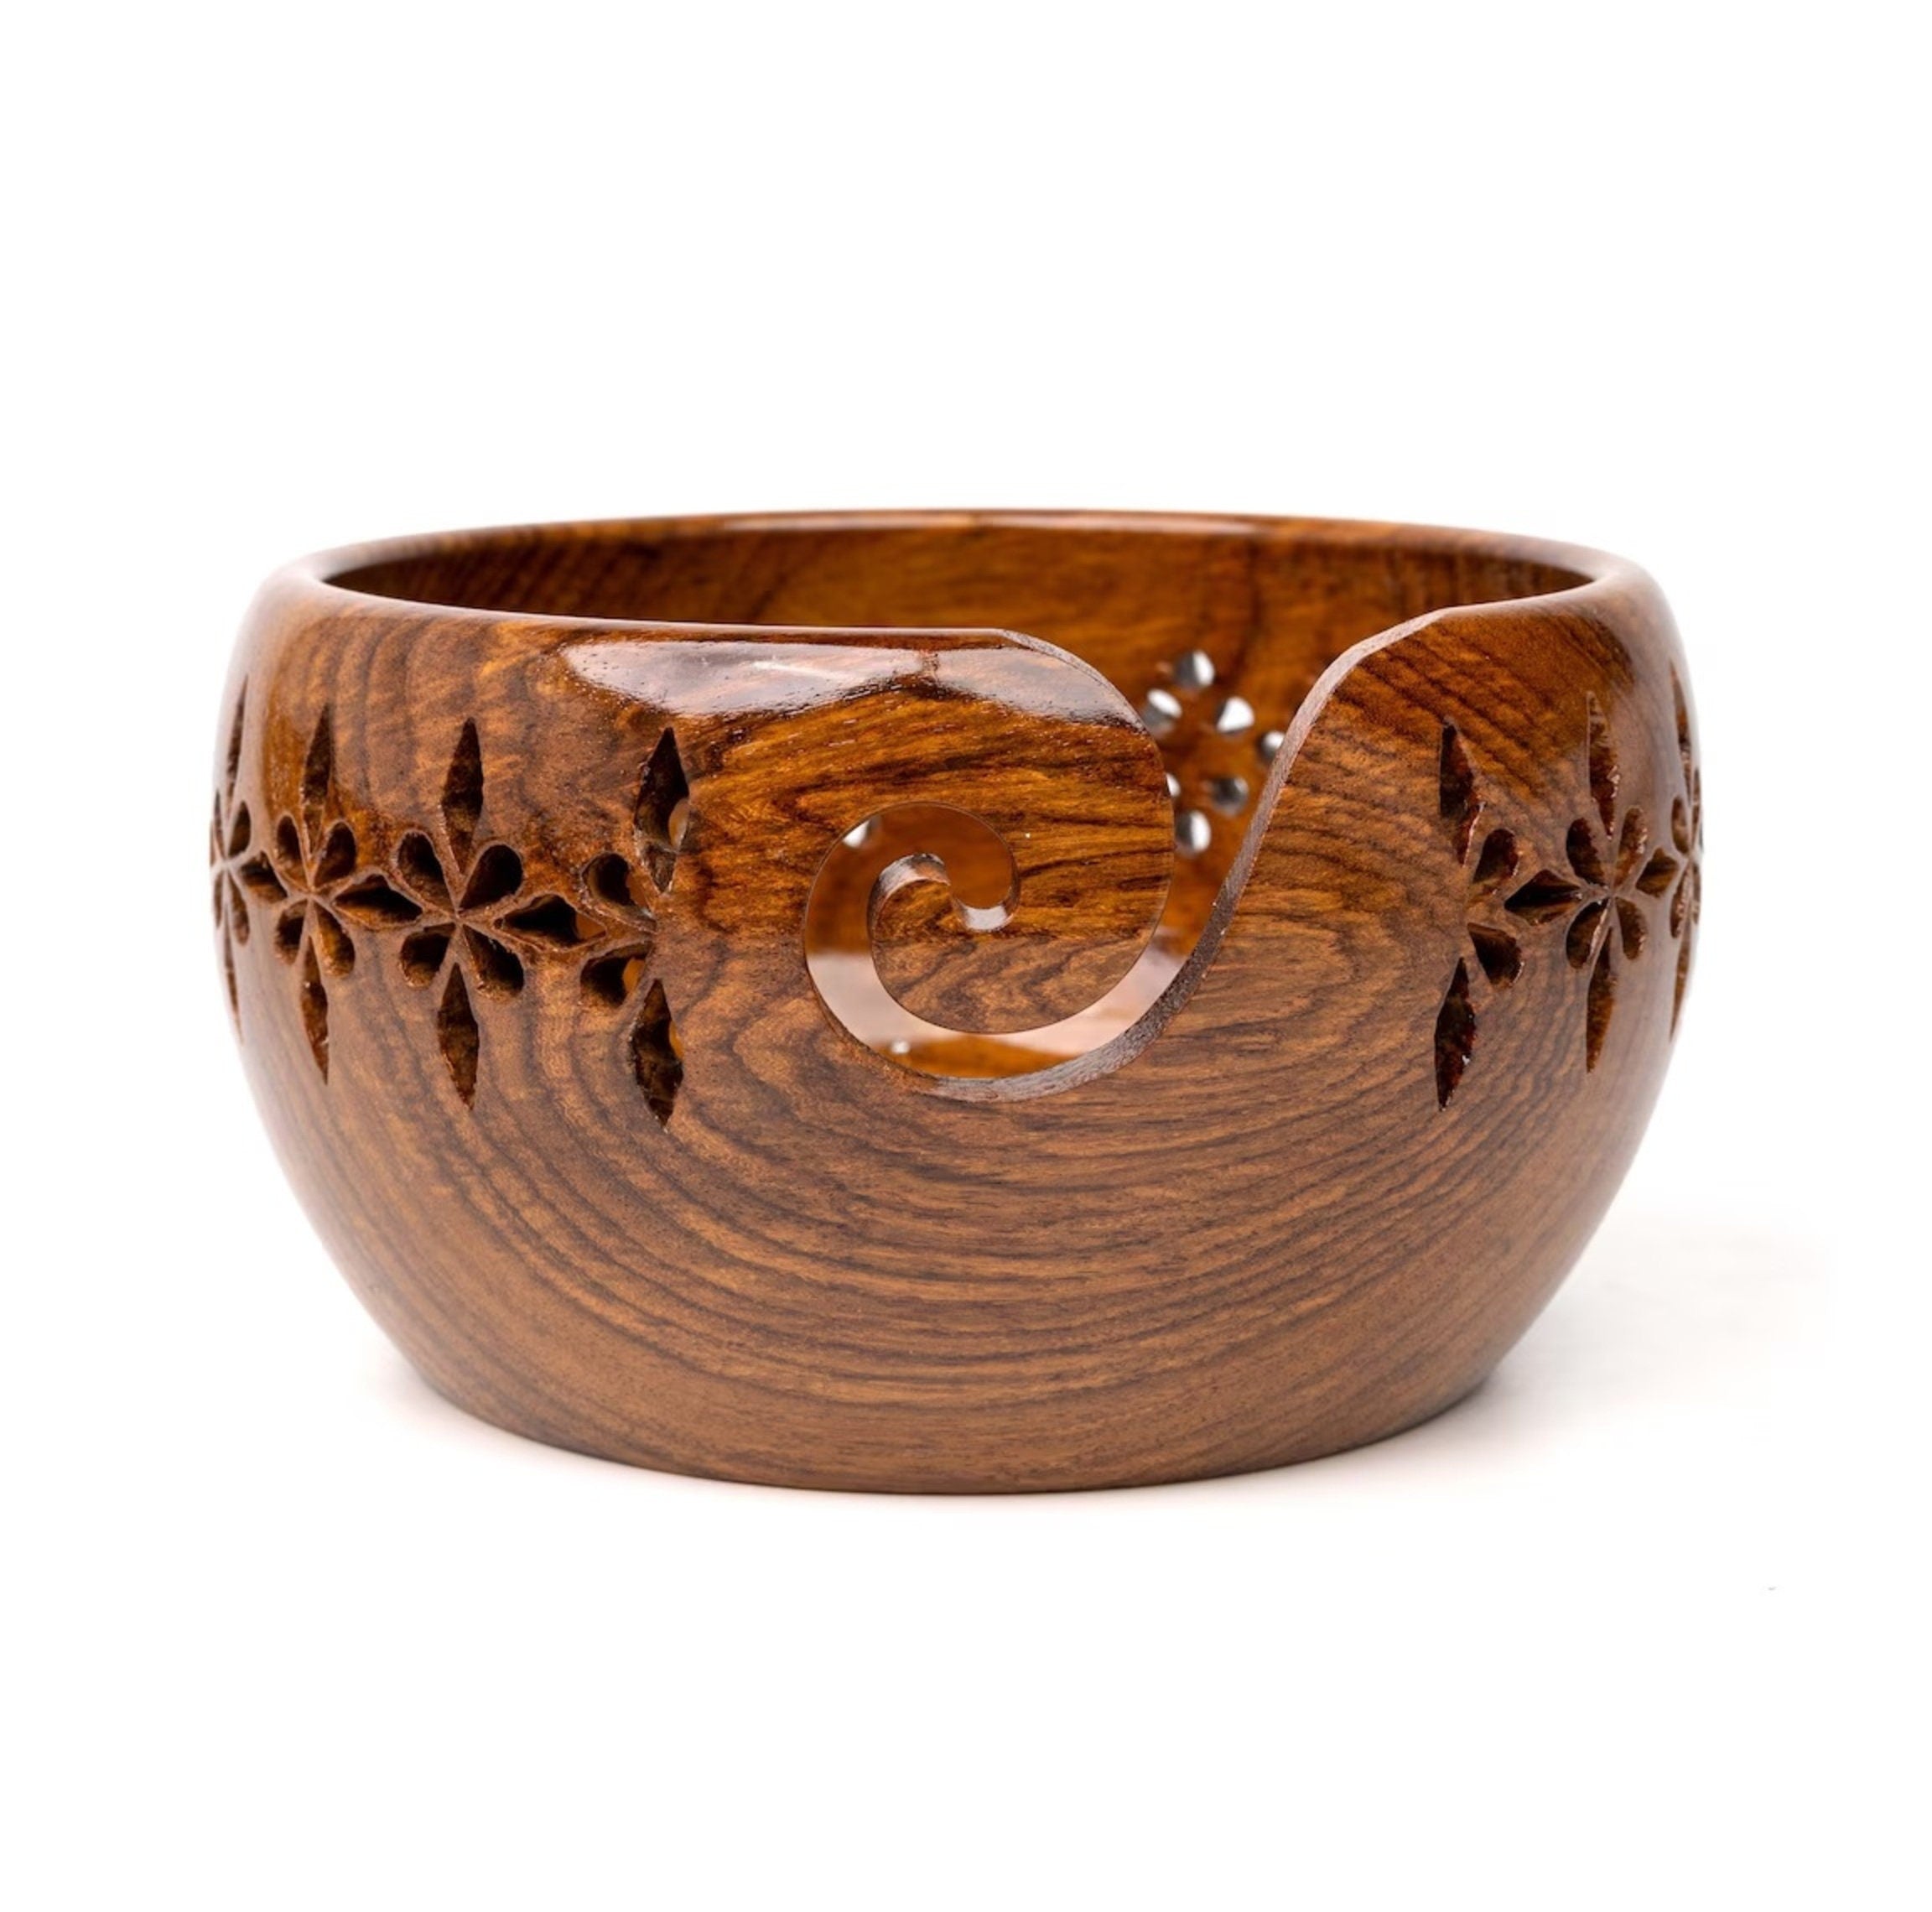 Rosewood Handcrafted Yarn Bowl 7" x 4"